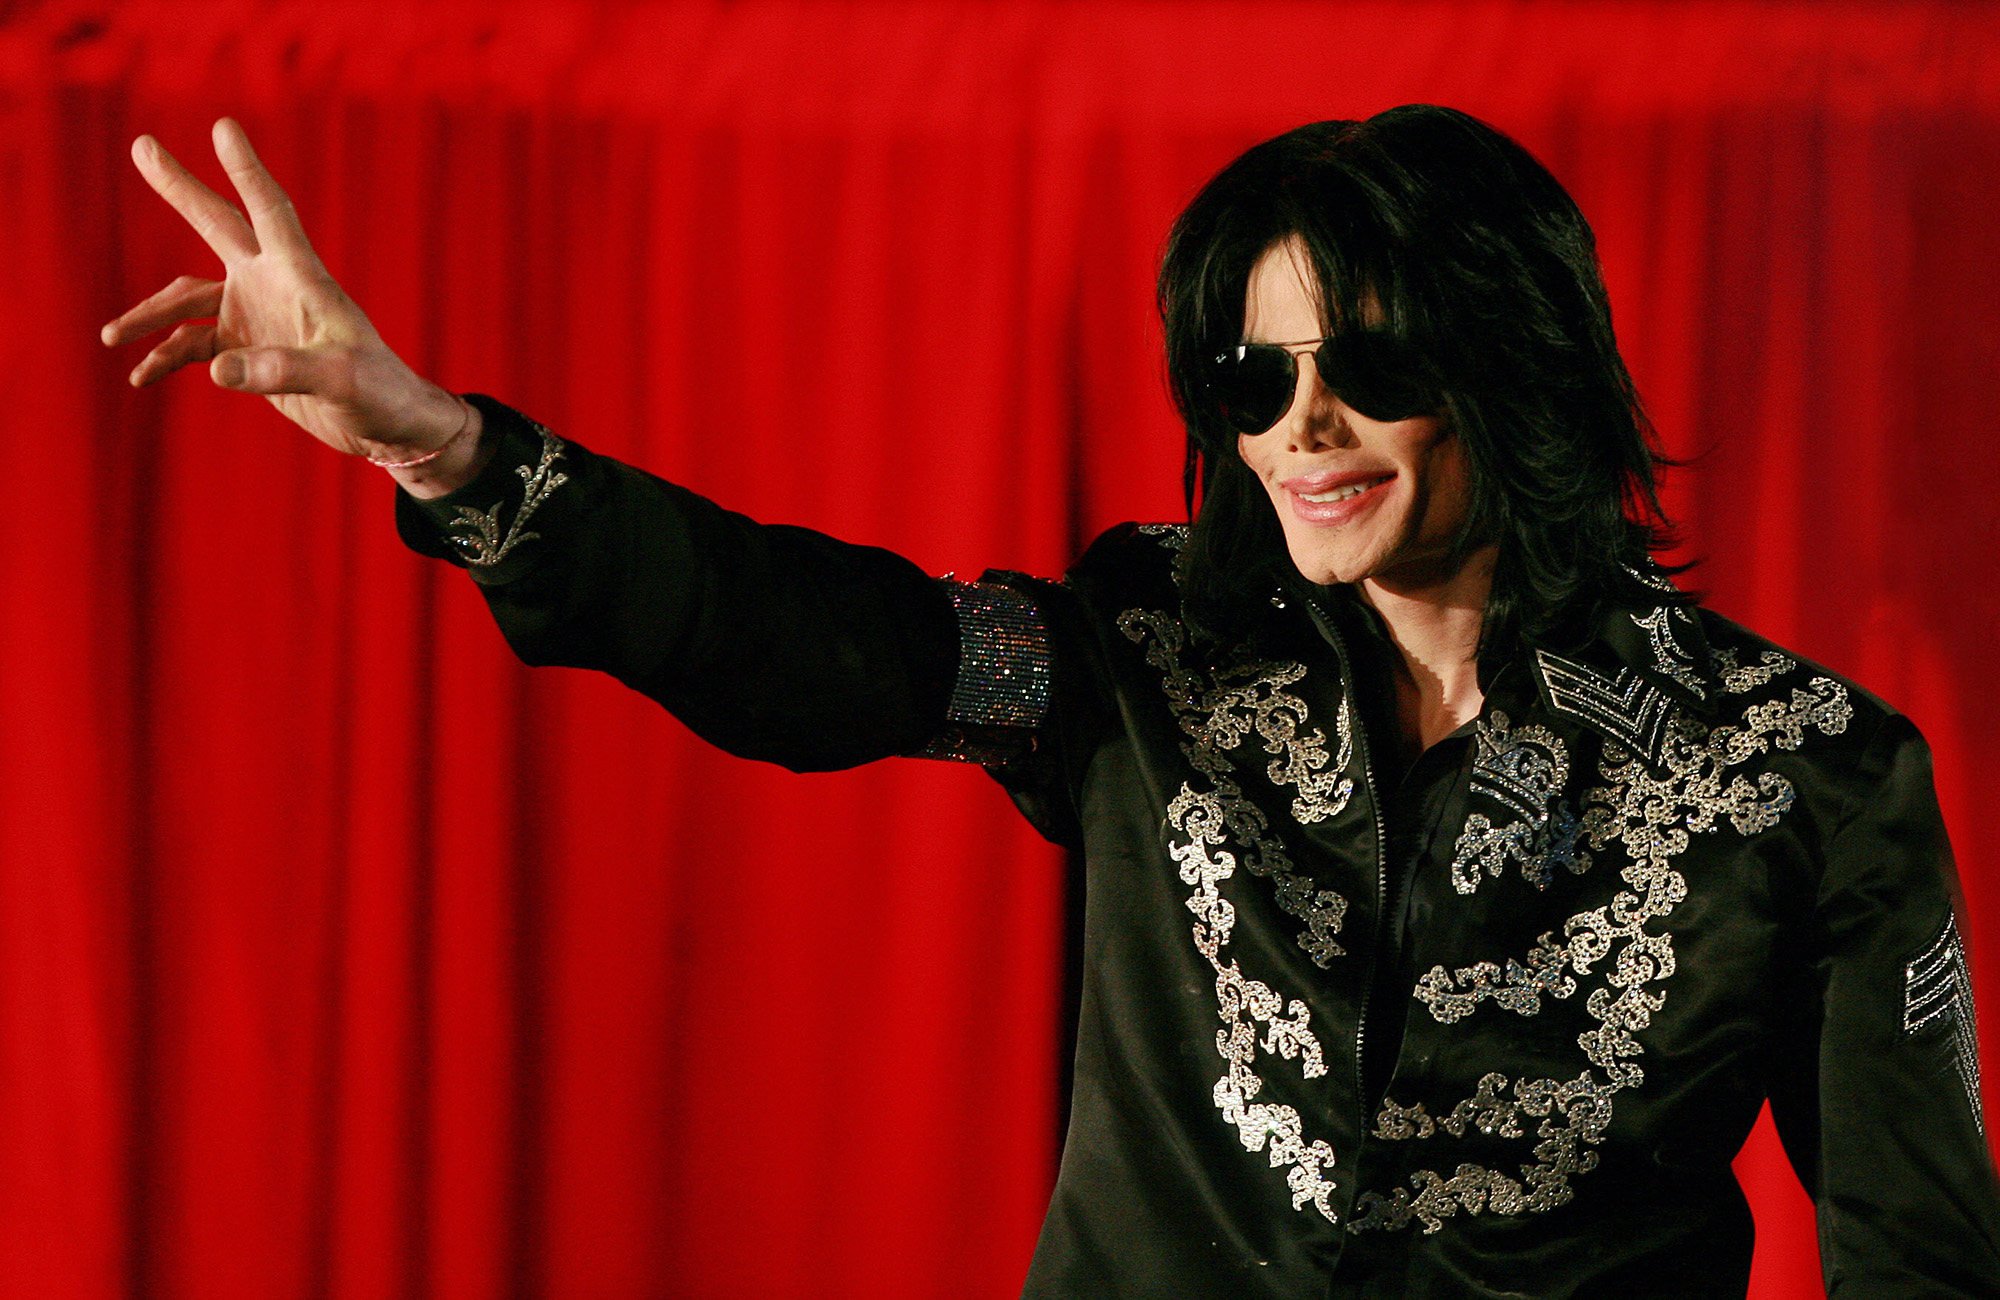 The family’s net worths ranked - Who’s the richest Jackson?   - Michael Jackson addresses a news conference at the O2 arena in London in March 2009. Photo: TNS